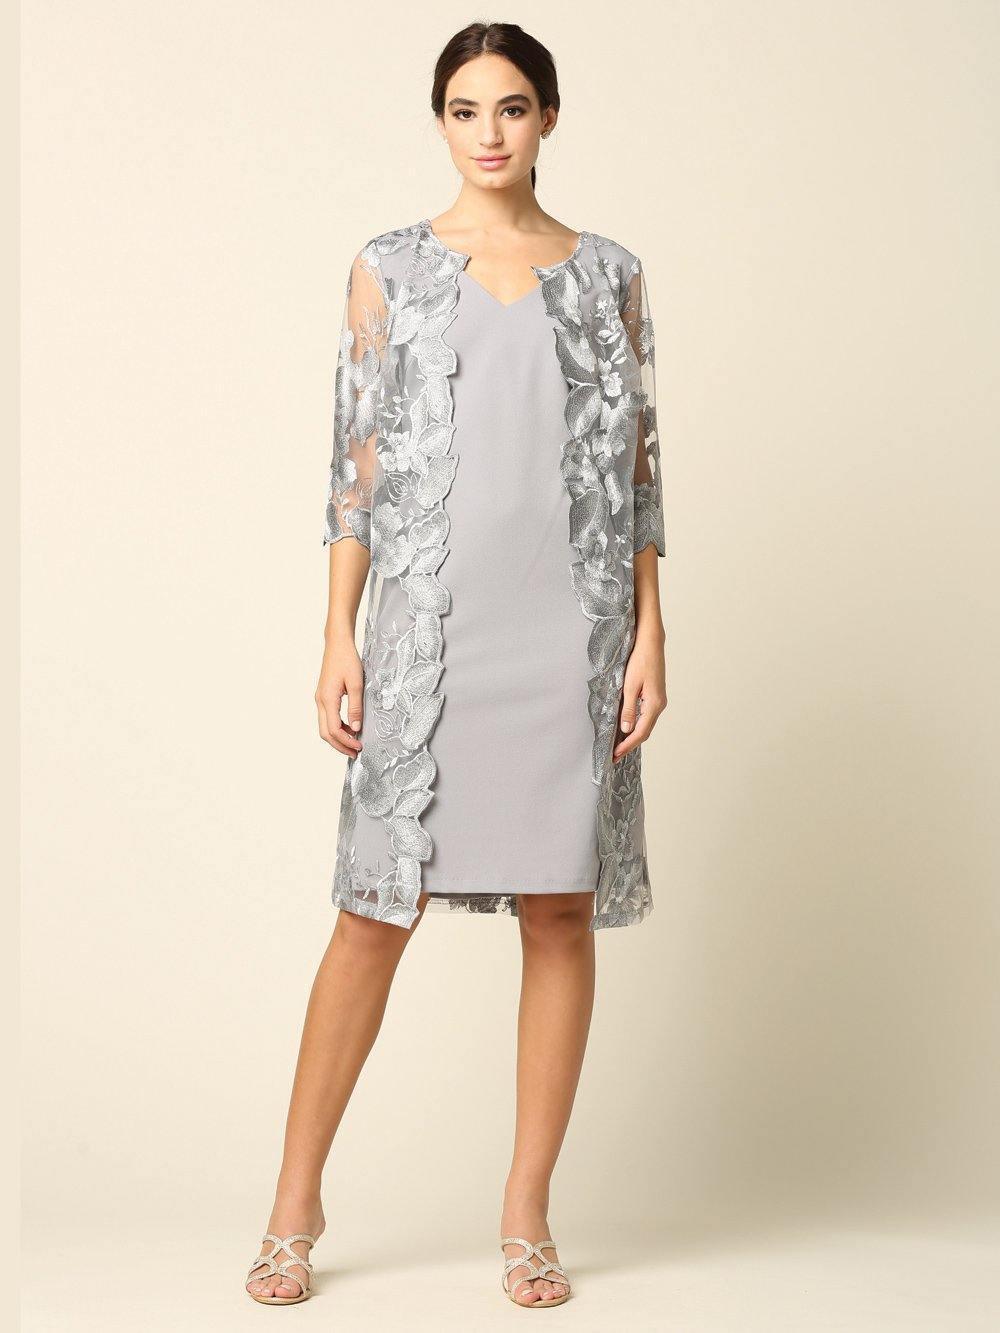 Short Mother of the Bride Chiffon Dress - The Dress Outlet Eva Fashion